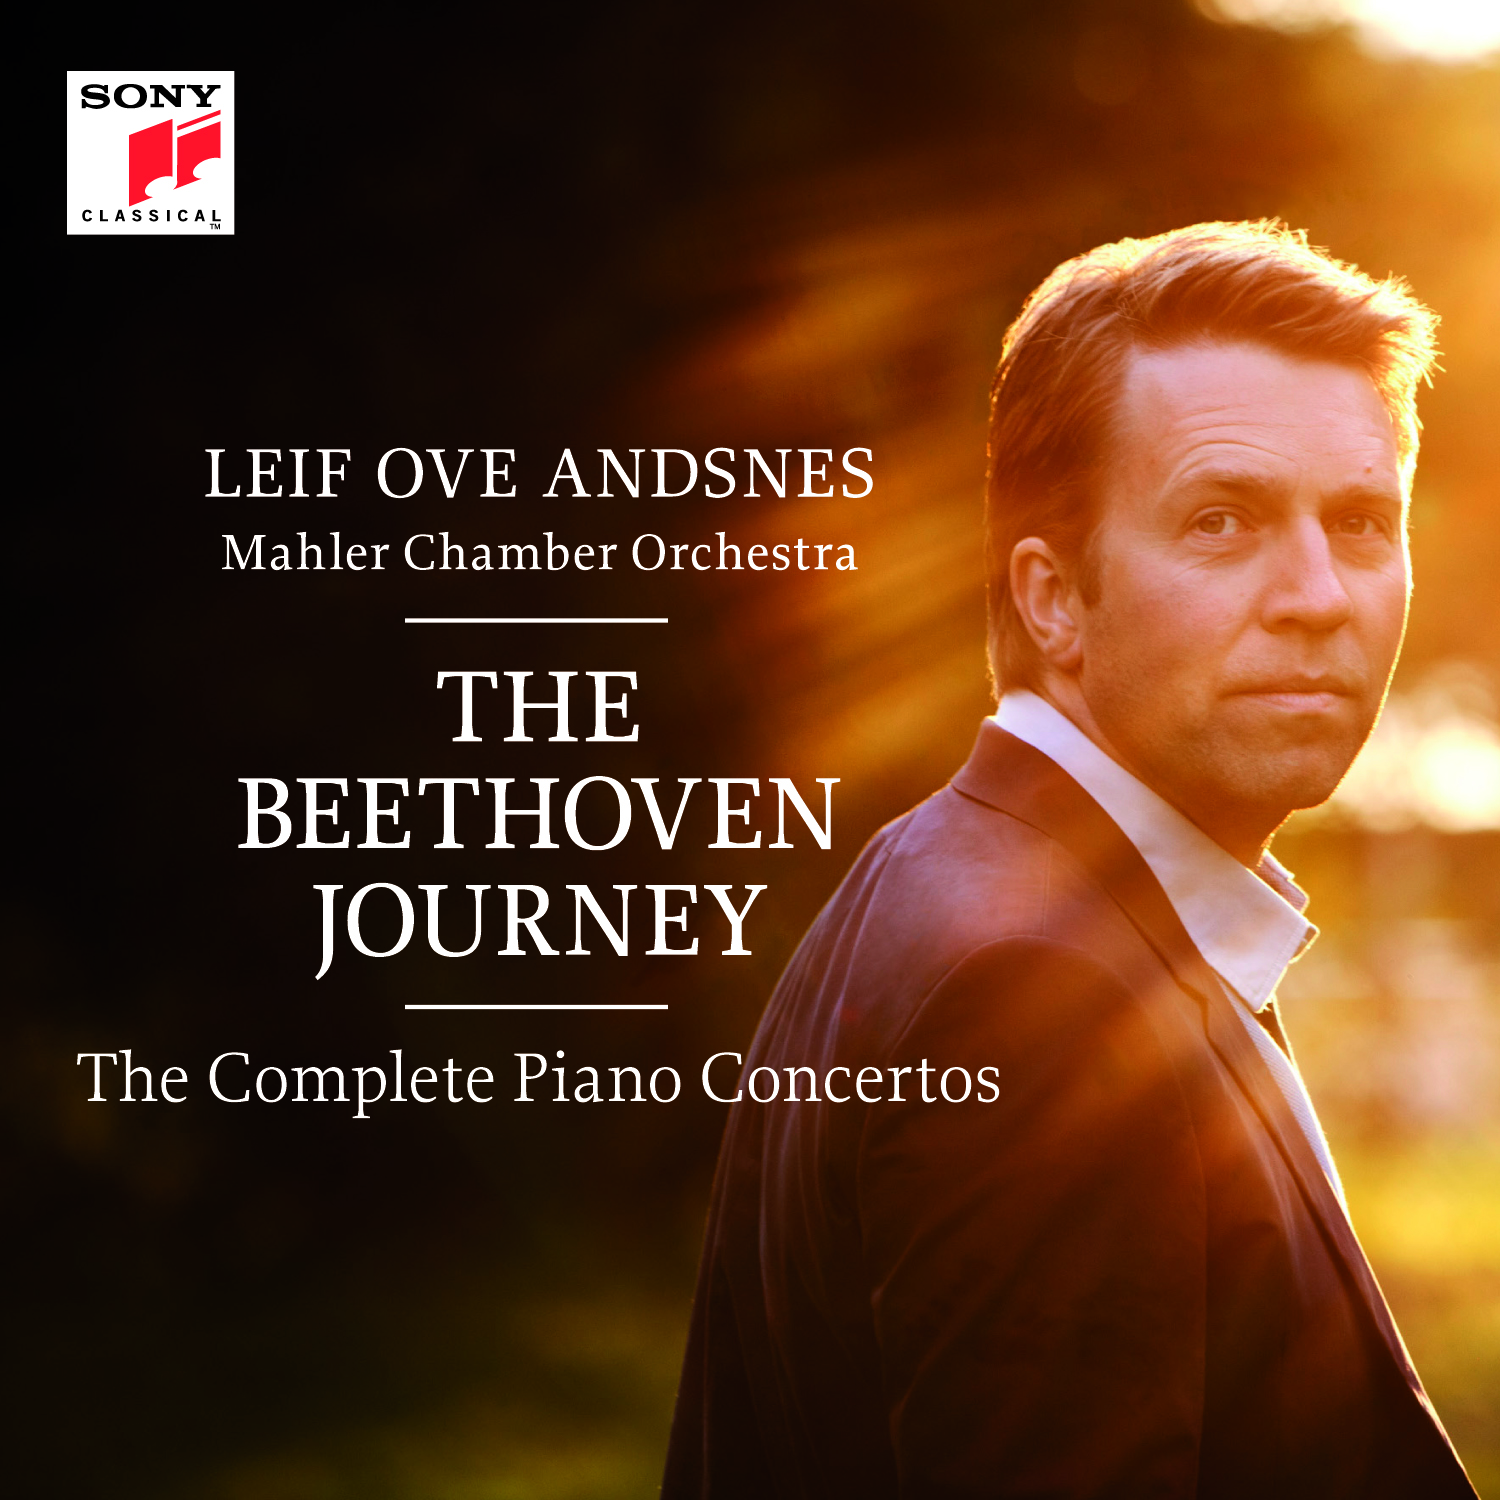 Leif Ove Andsnes_Beethoven Journey Box_Coverfinal high res